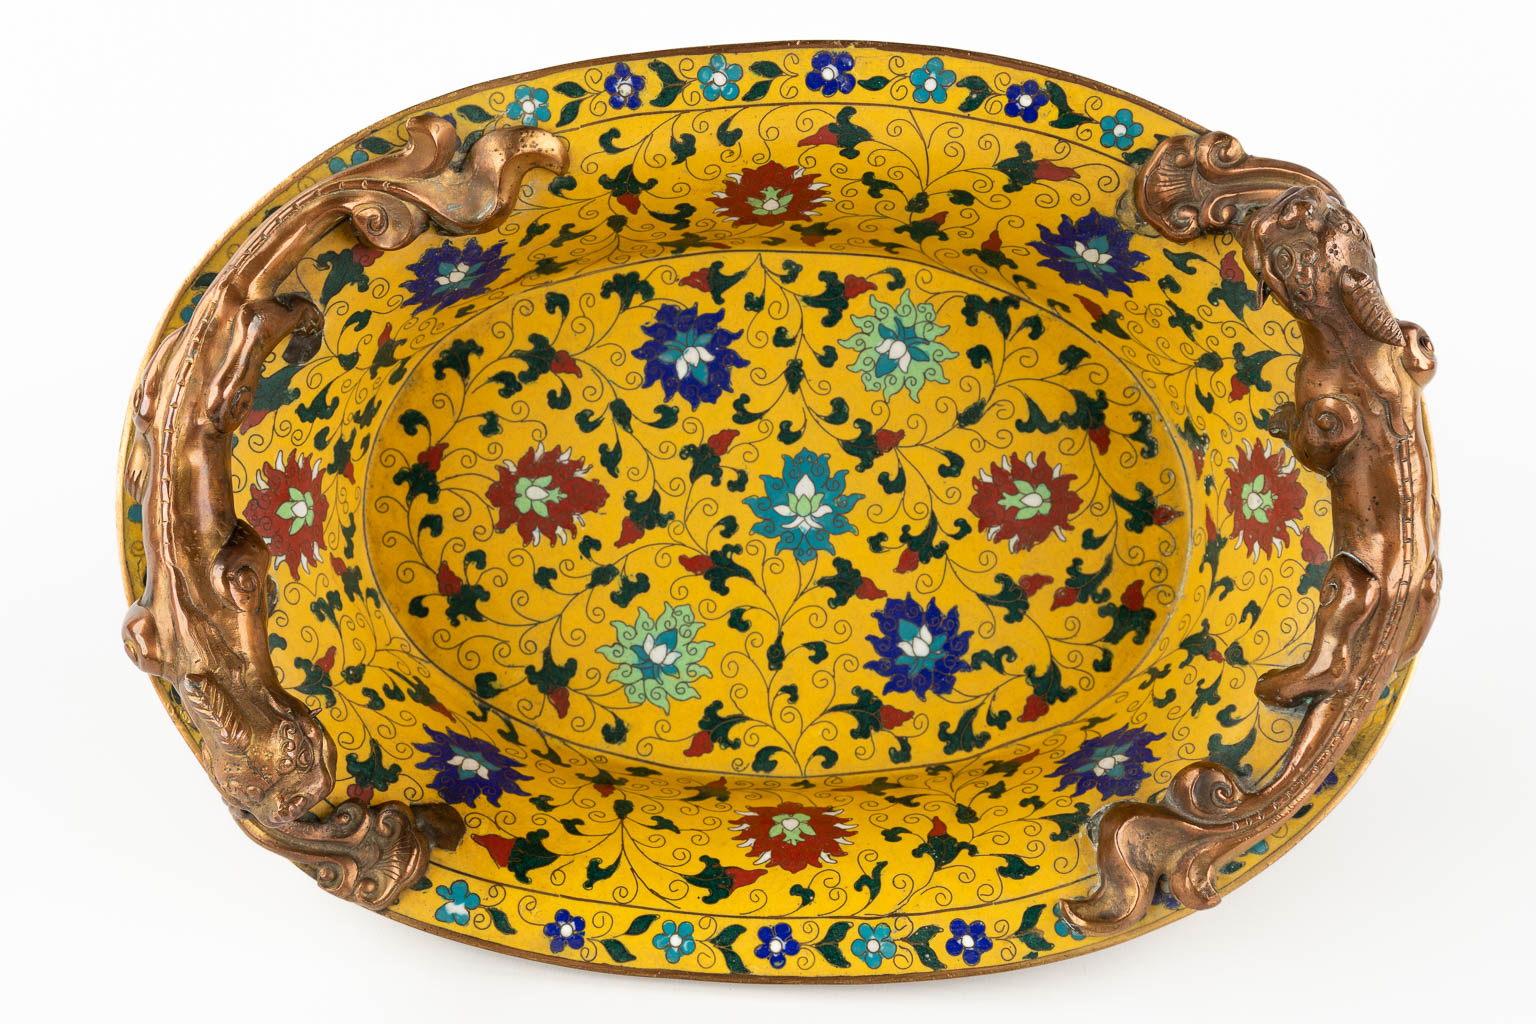 A Chinese cloisonné bronze bowl, mounted with dragons and finished with floral decor. (D:25,5 x W:36 x H:16 cm)